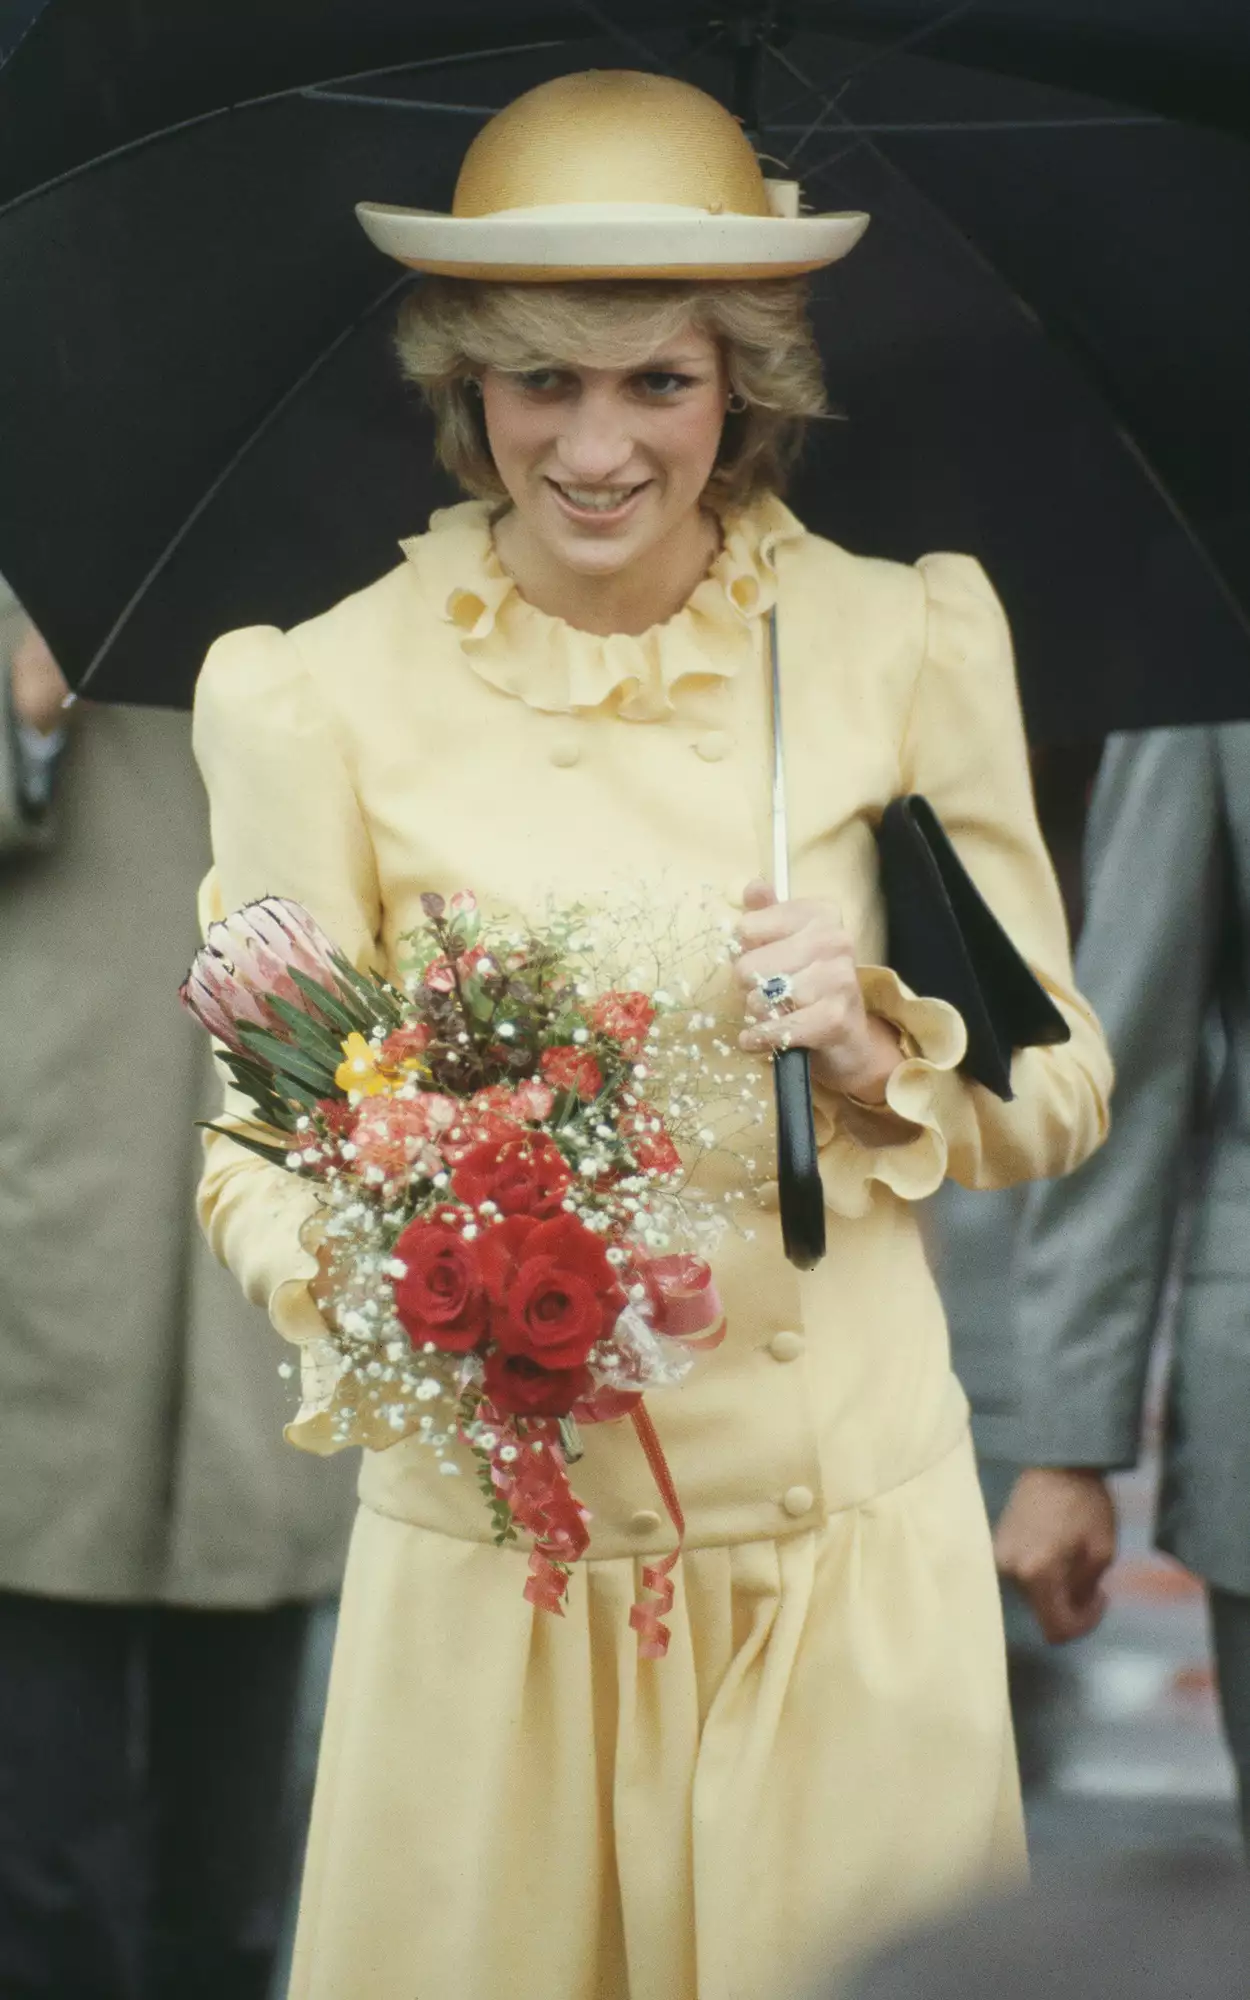 Diana, Princess of Wales (1961 - 1997) visits the Pupuke School on the North Shore in New Zealand, April 1983. She is wearing a Catherine Walker suit and a John Boyd hat